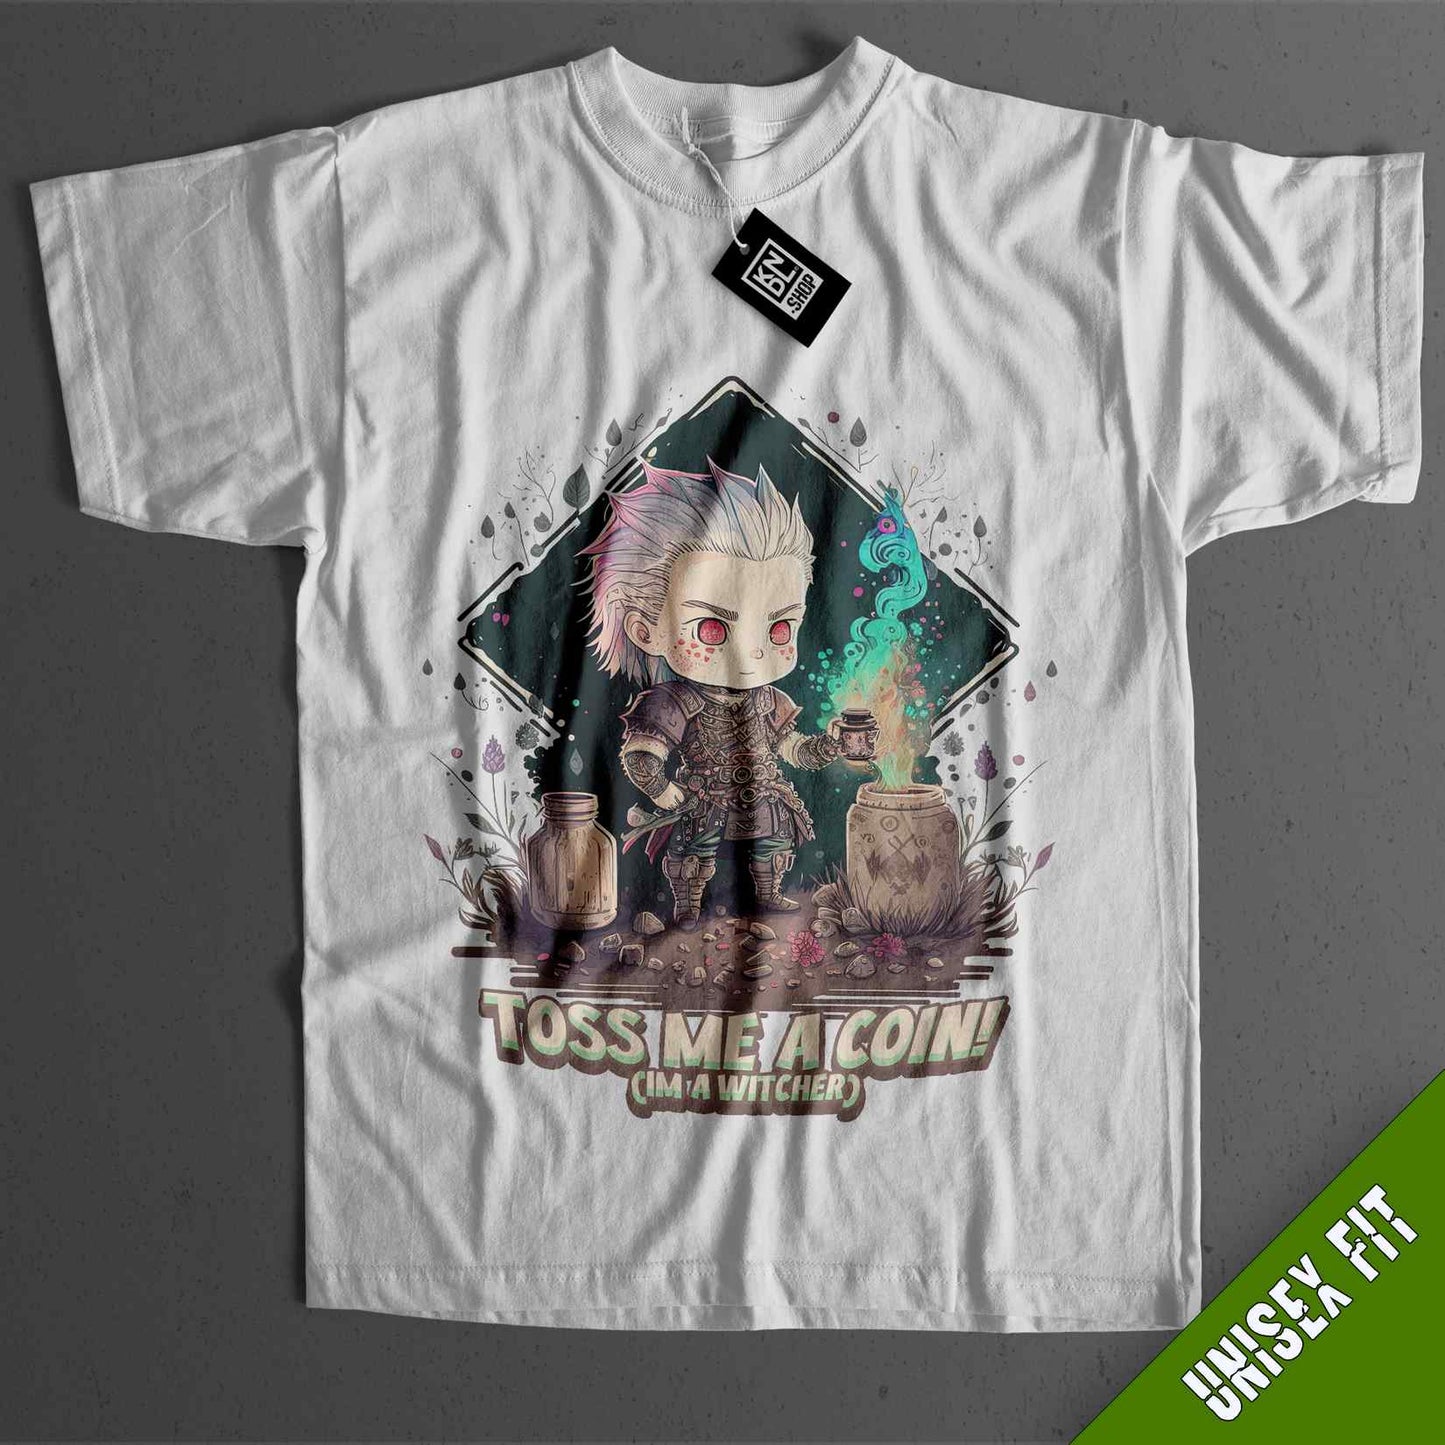 a white t - shirt with a picture of a boy and a girl on it